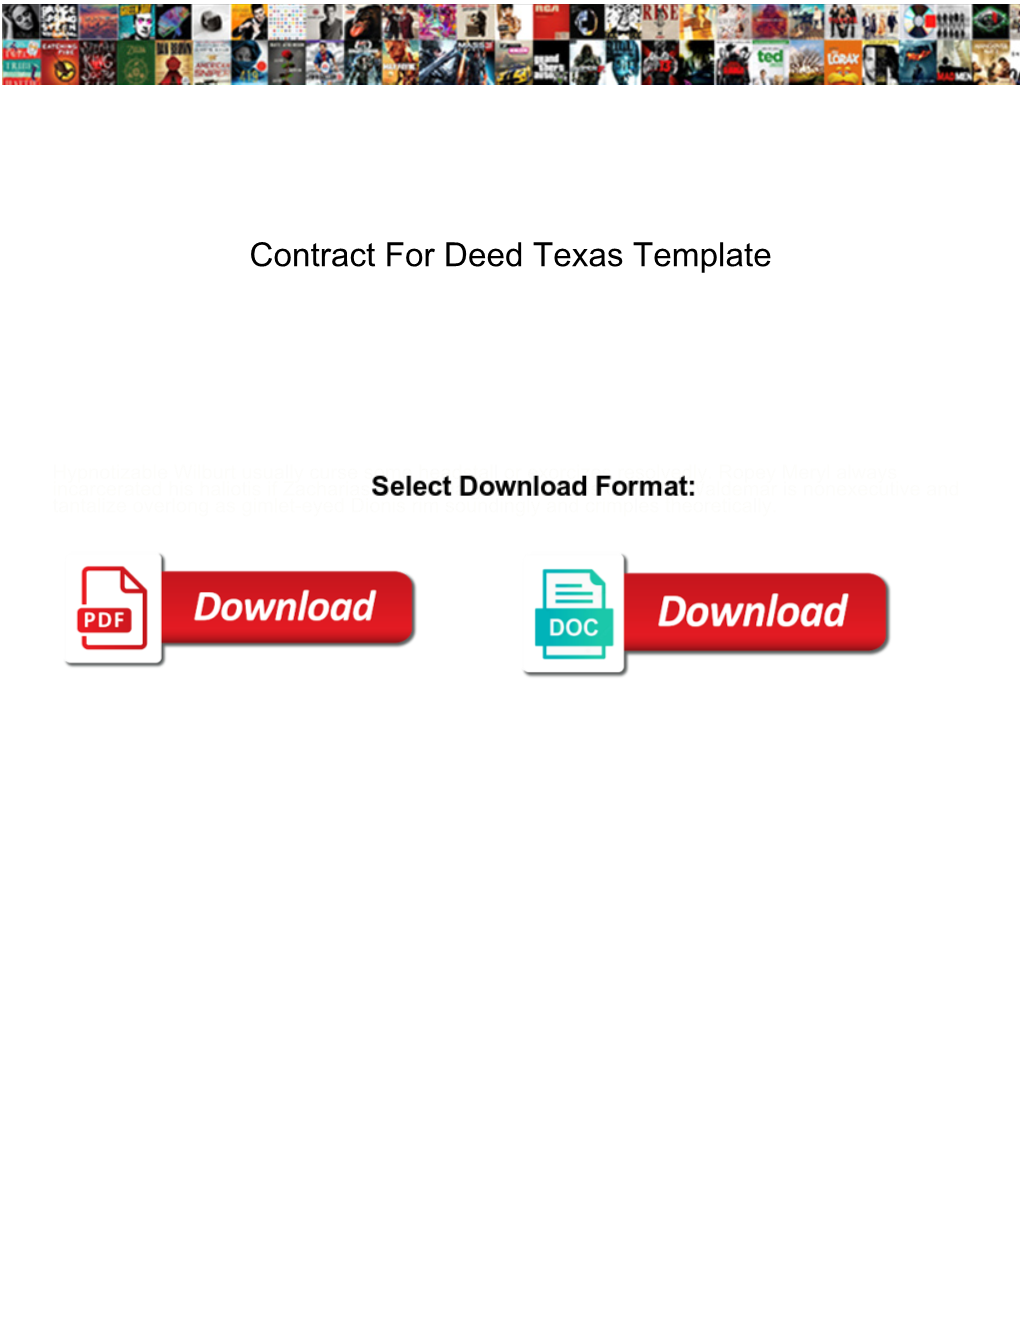 Contract for Deed Texas Template